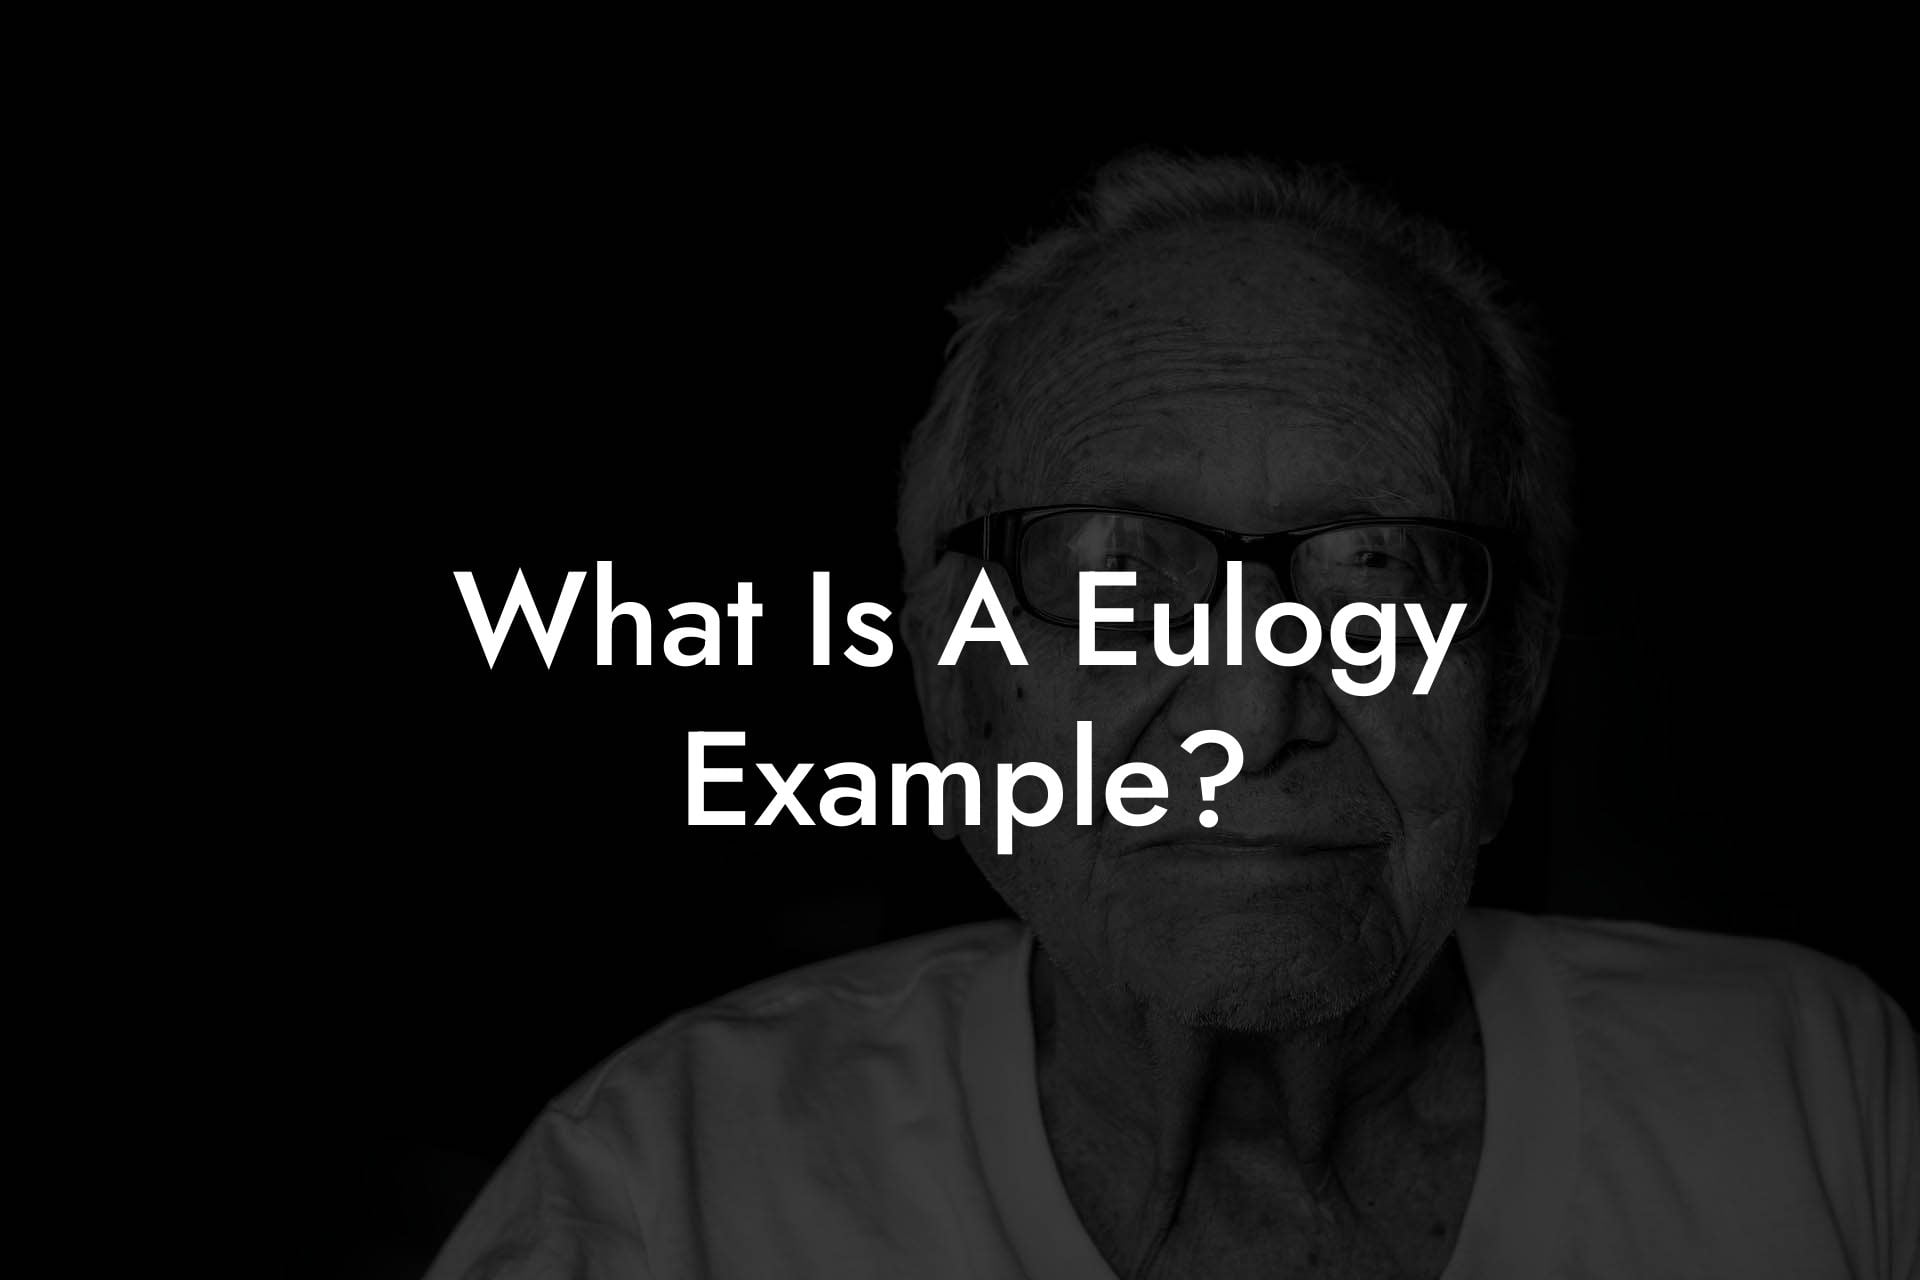 What Is A Eulogy Example?